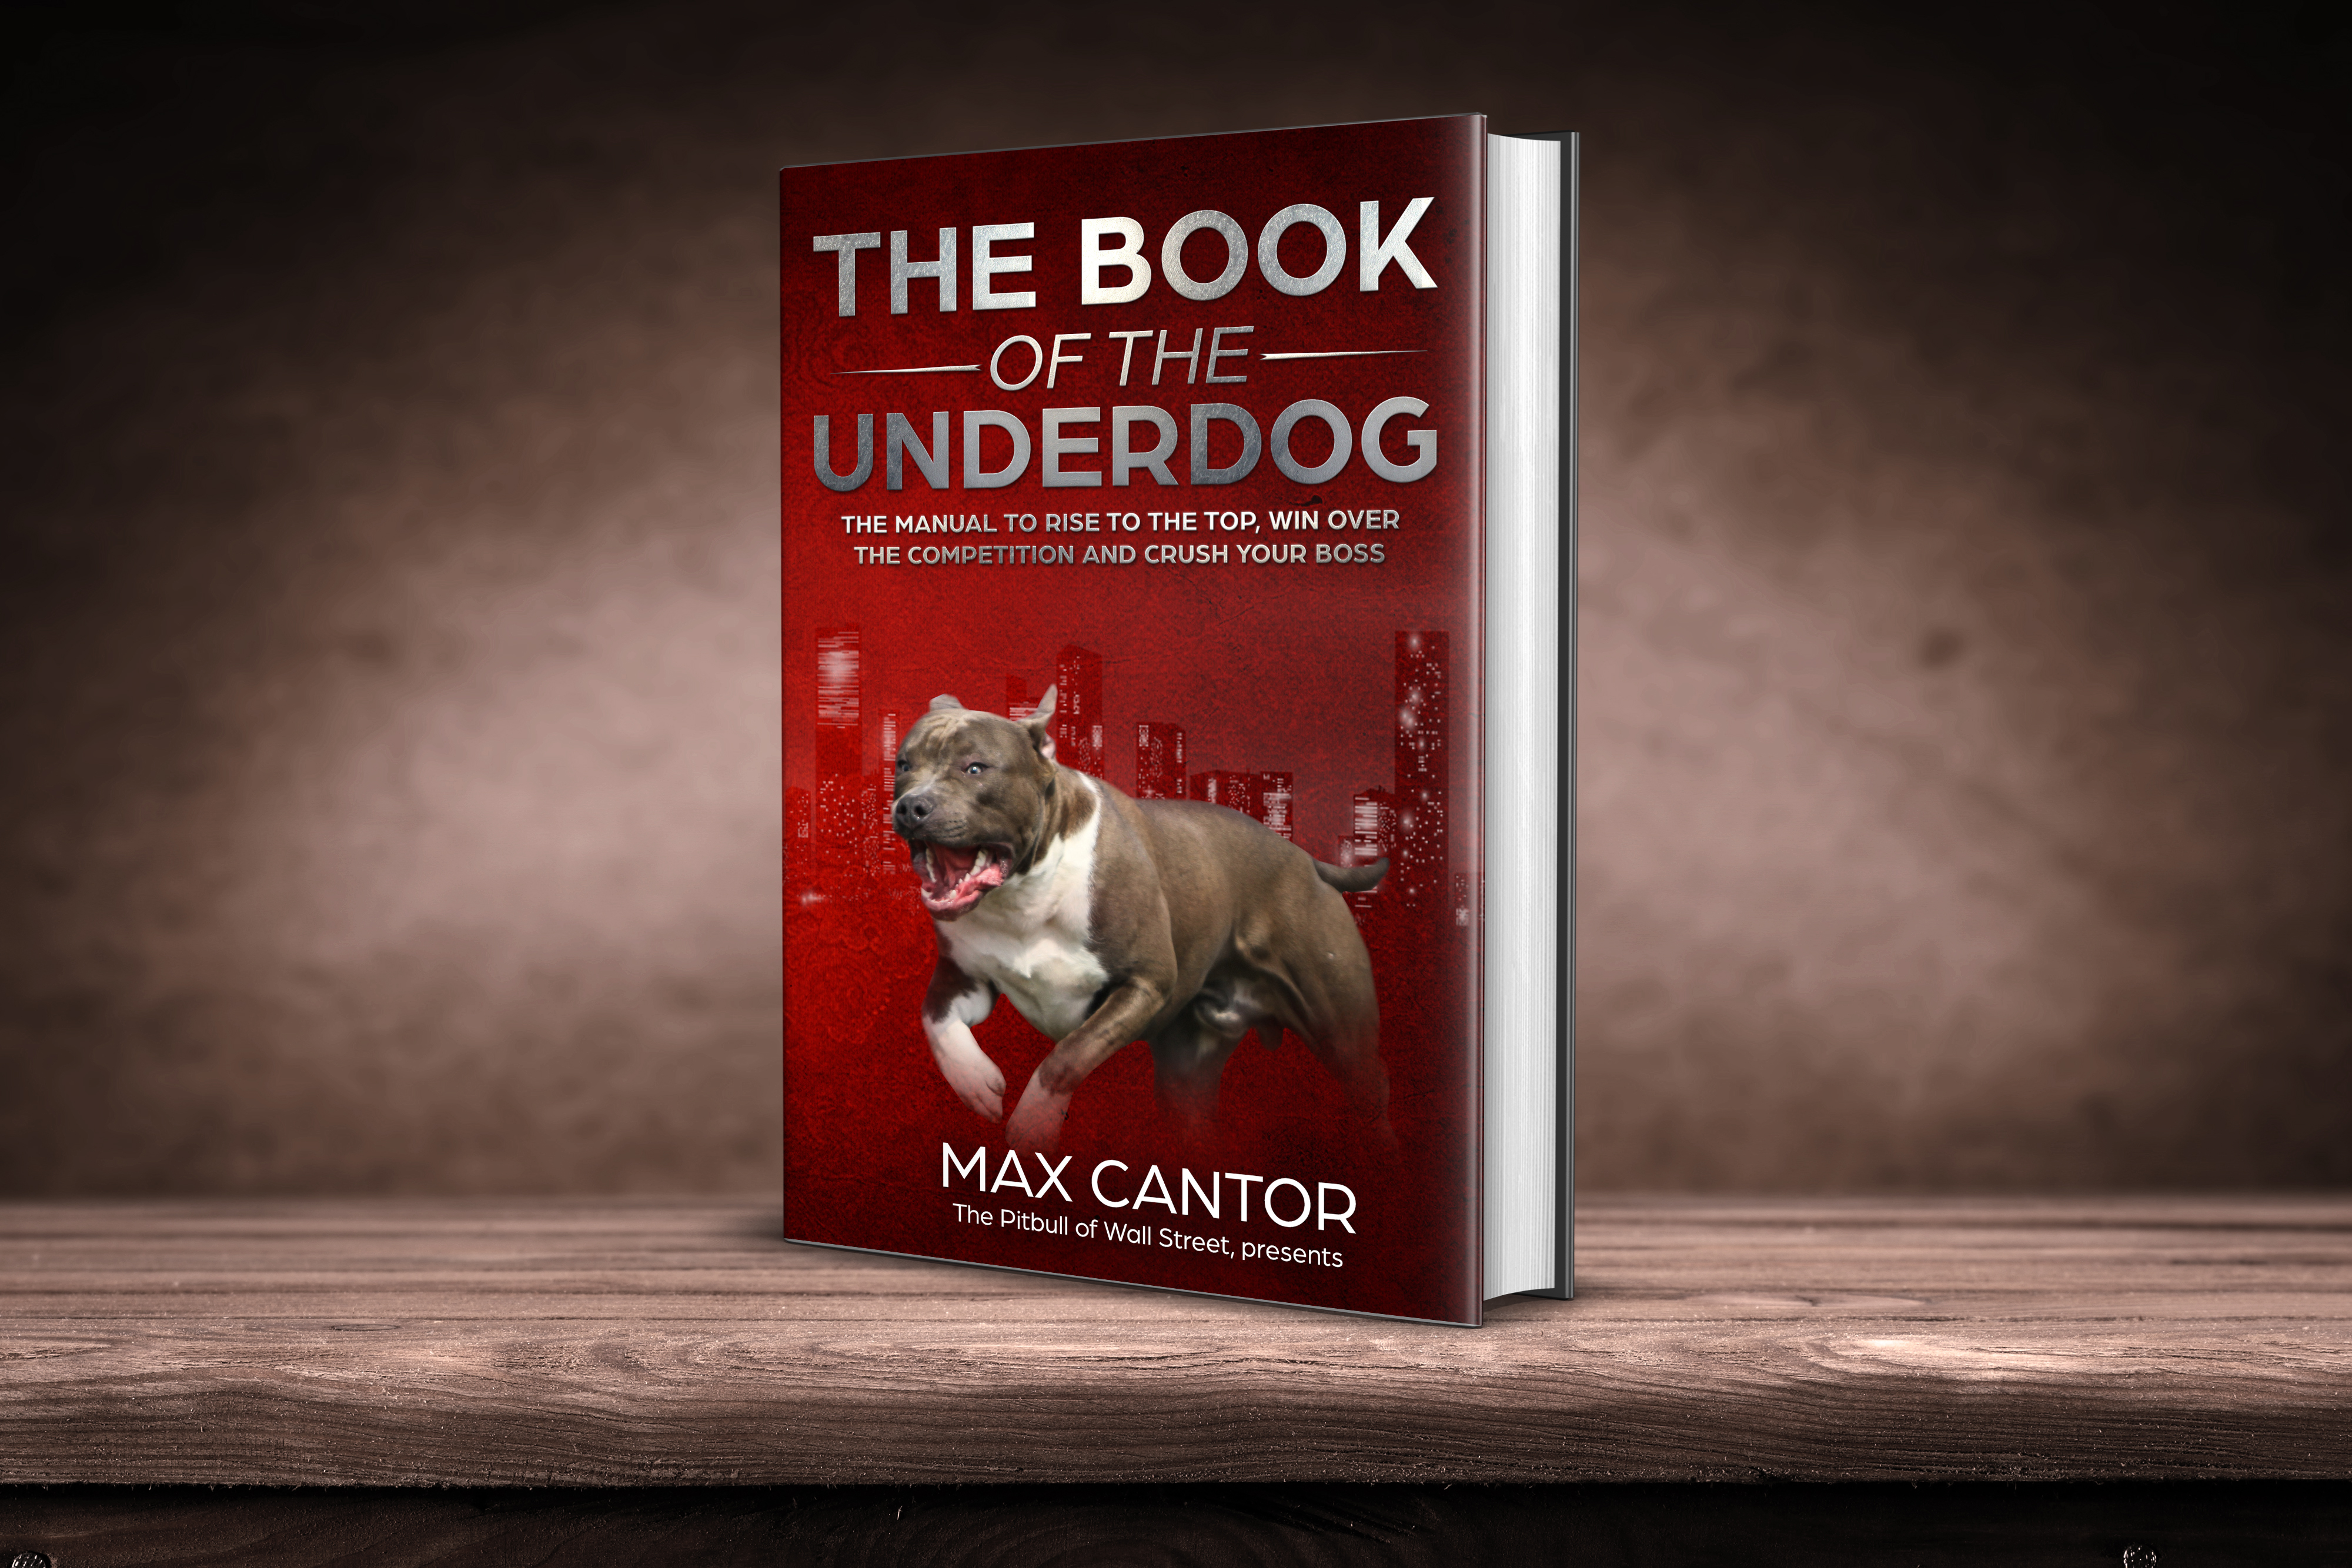 The Book of The Underdog